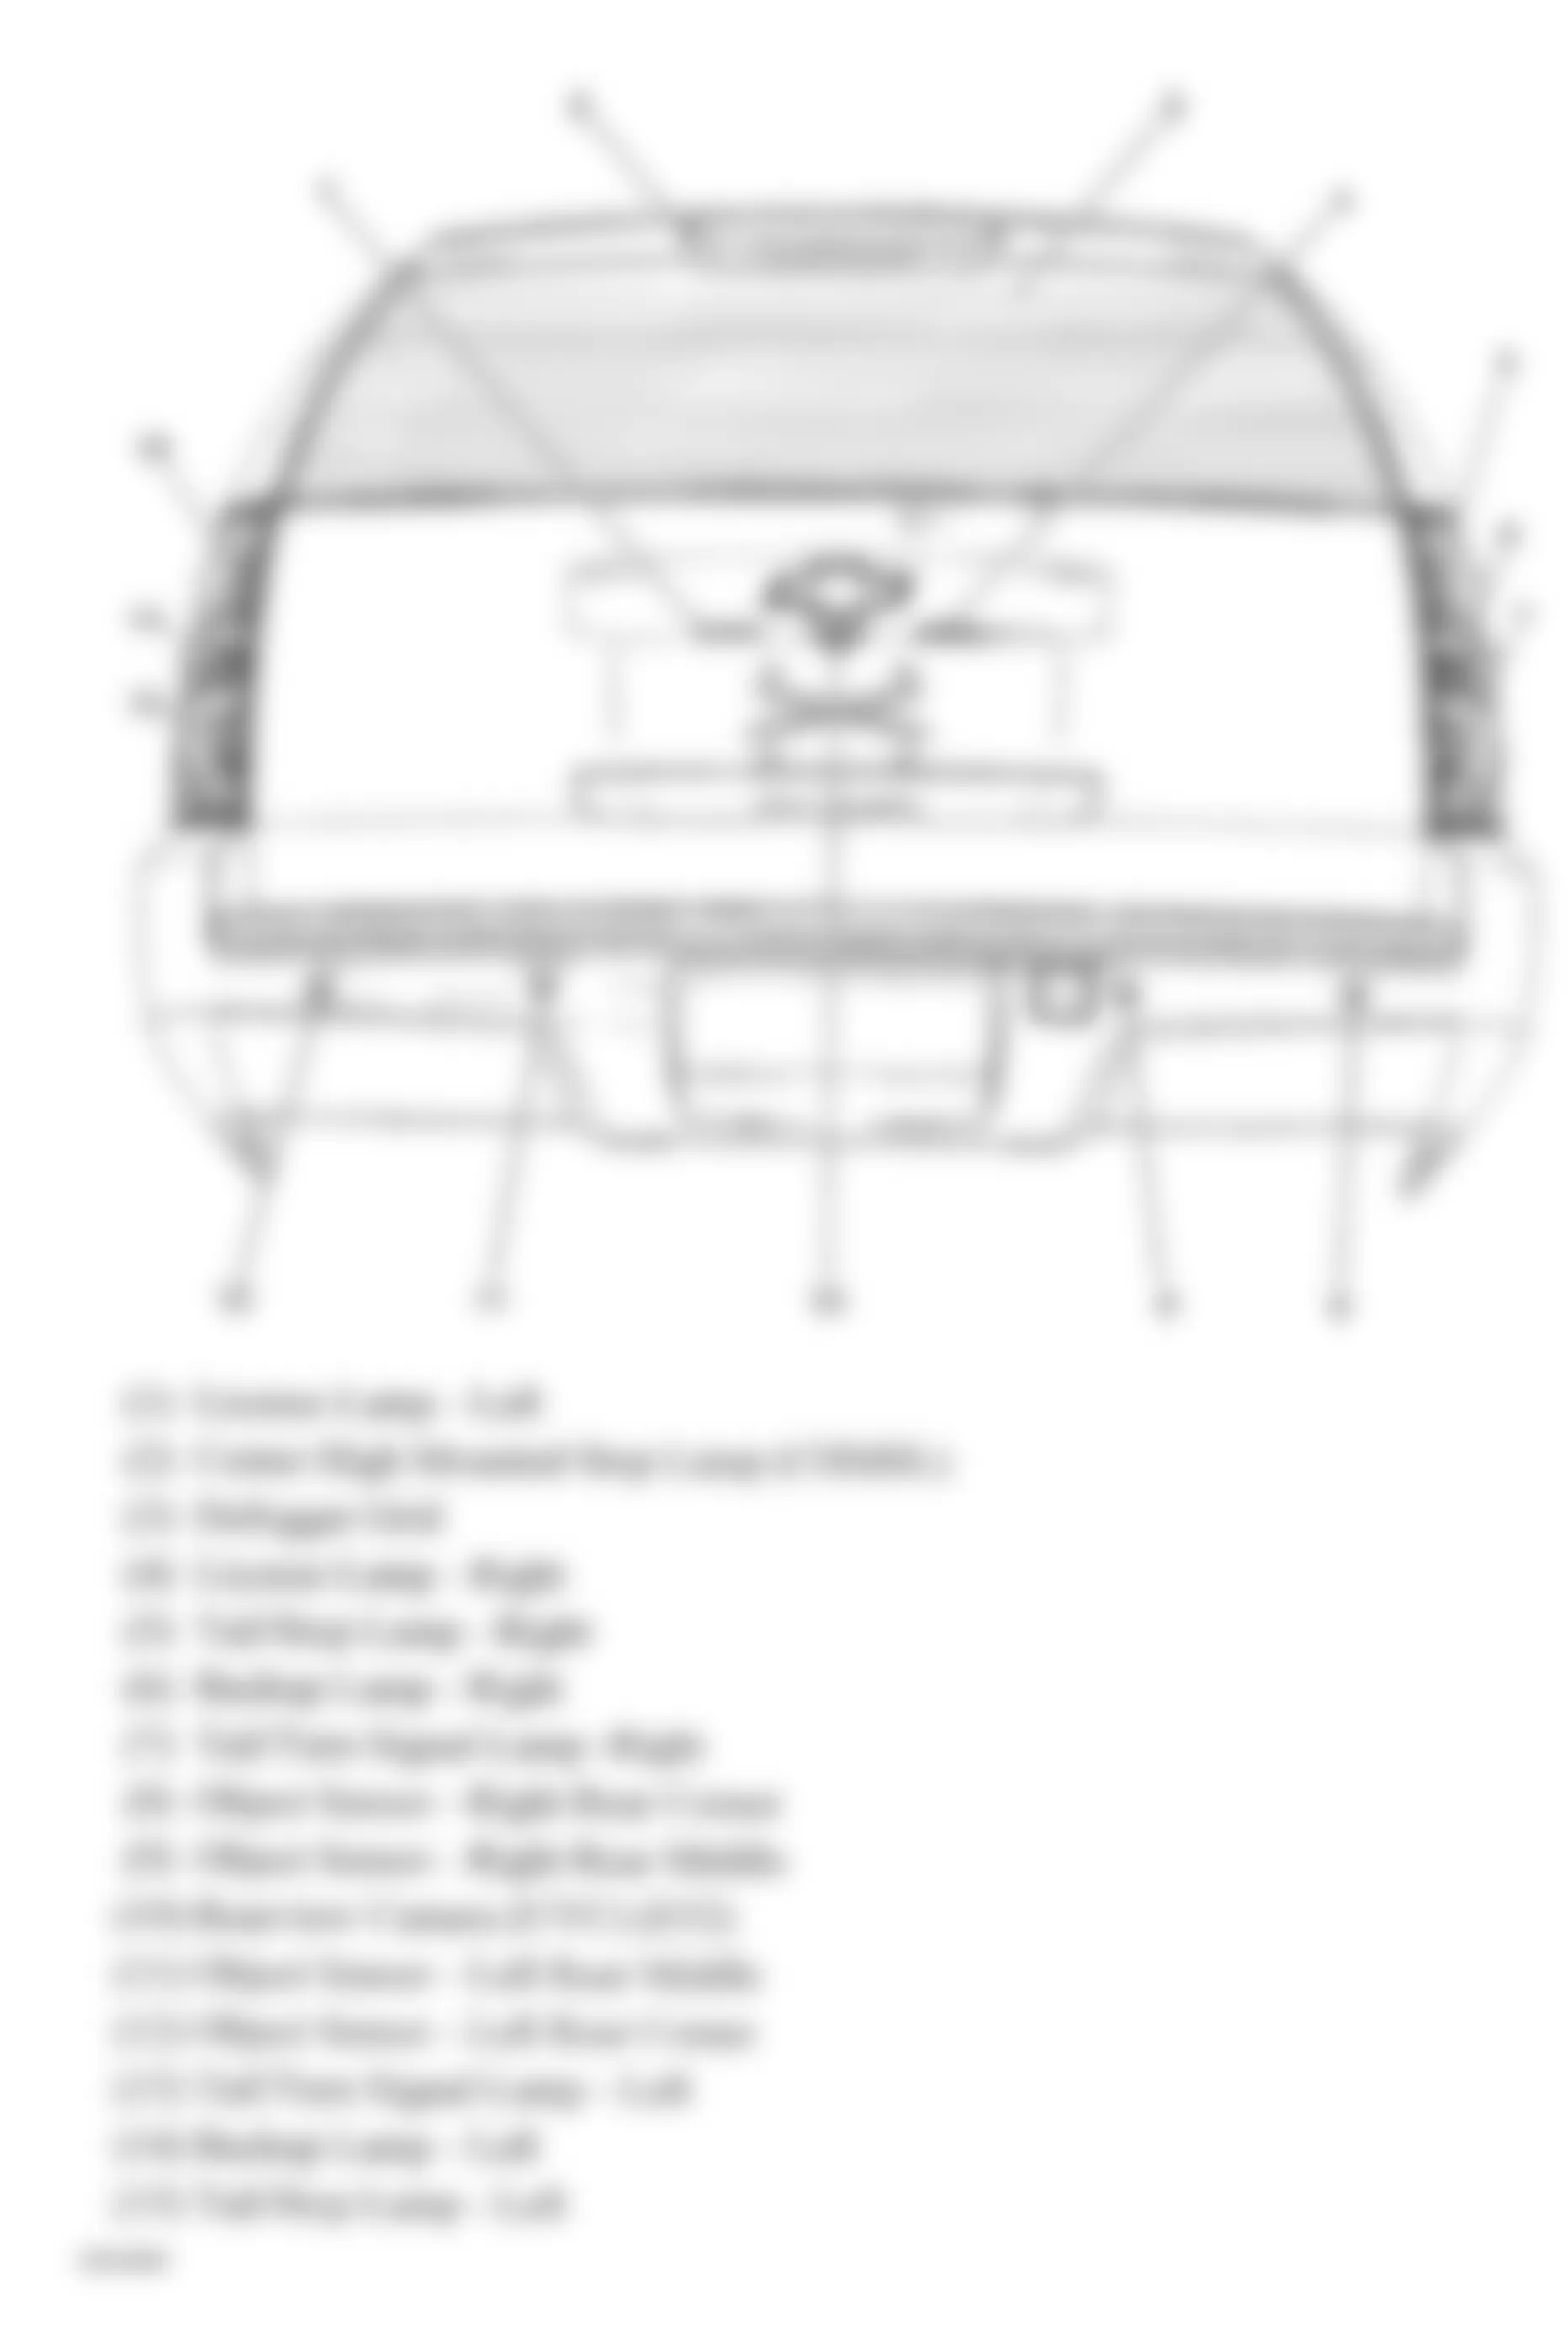 GMC Yukon XL C1500 2009 - Component Locations -  Rear Of Vehicle (Avalanche, Suburban & Tahoe W/One Piece Liftgate)